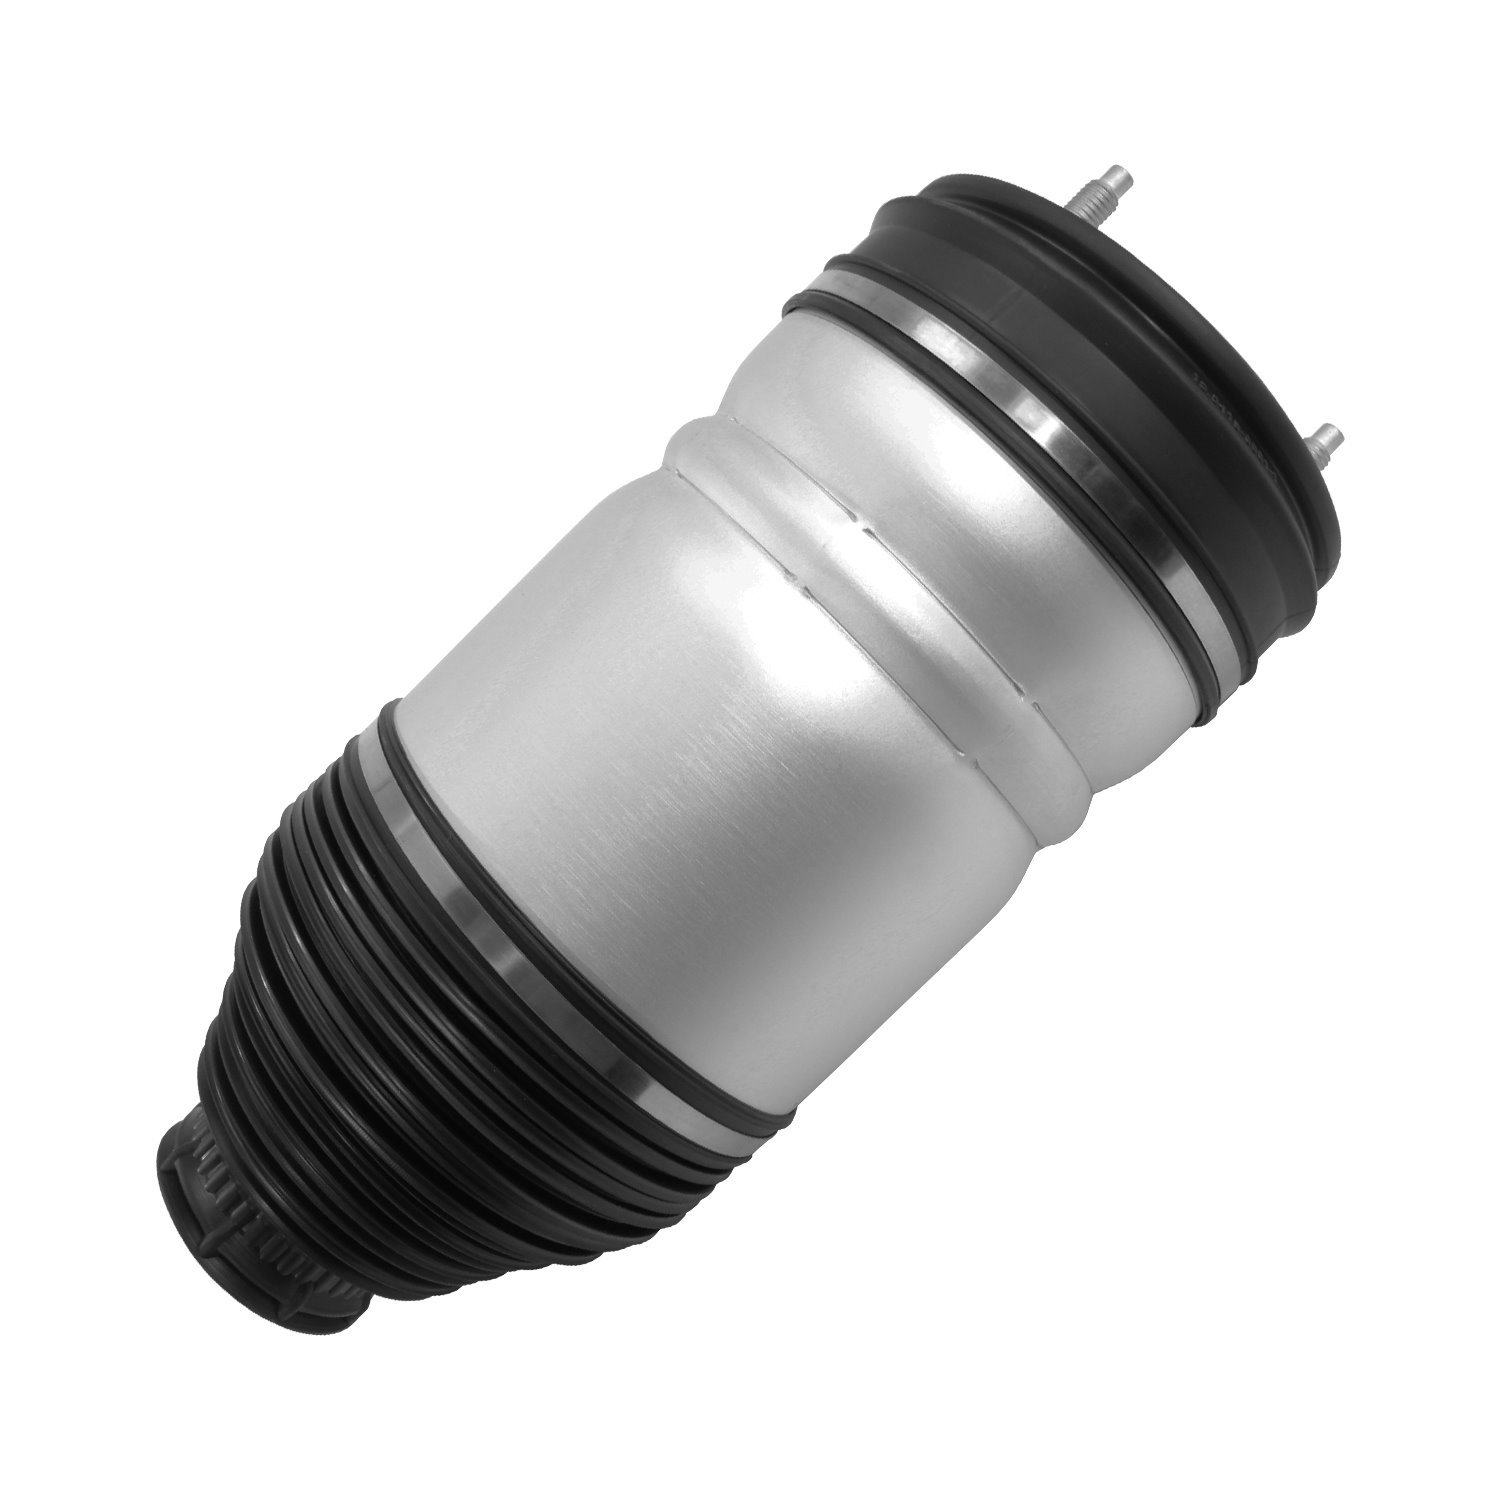 15-118100 Suspension Air Spring, Front Left, Incl. Installation Instructions, O-Ring Seal Kit Fits Select Ram 1500